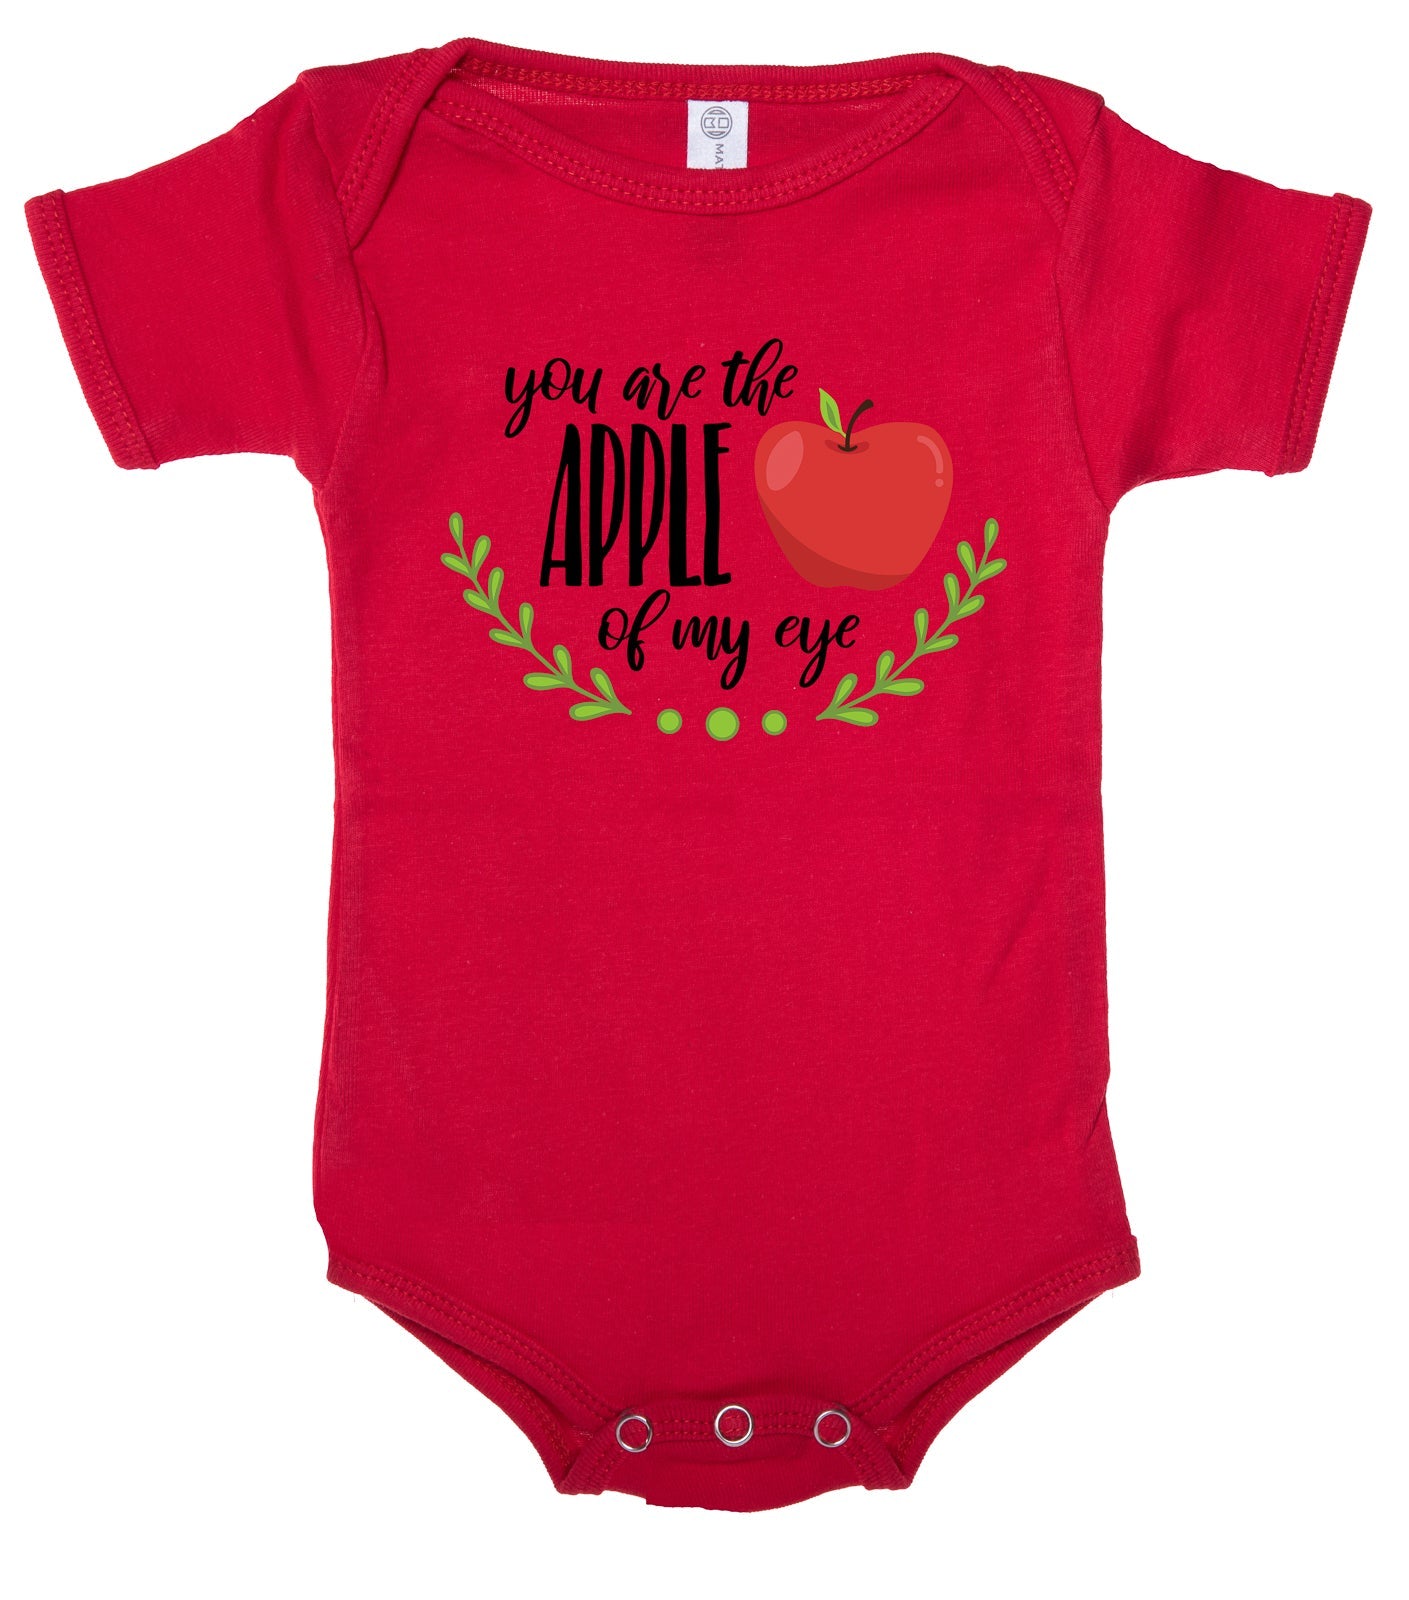 You Are the Apple of My Eye Baby Romper - Mato & Hash